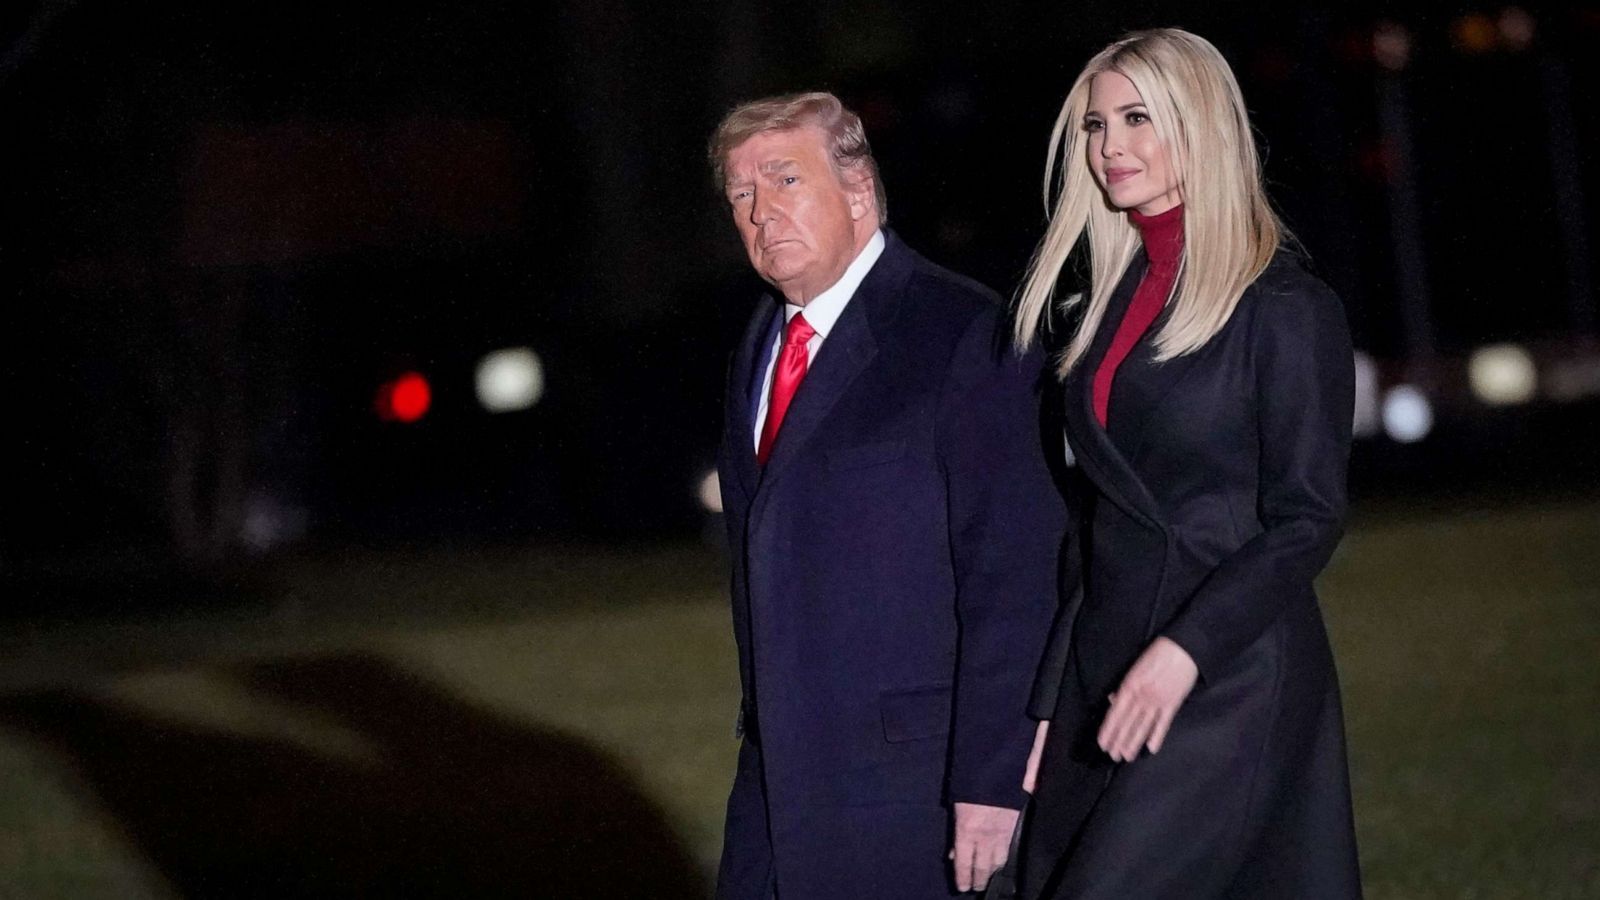 Ivanka Trump's journey from the glamorous parties of Beverly Hills to the solemnity of a Manhattan courtroom encapsulates a dramatic shift.